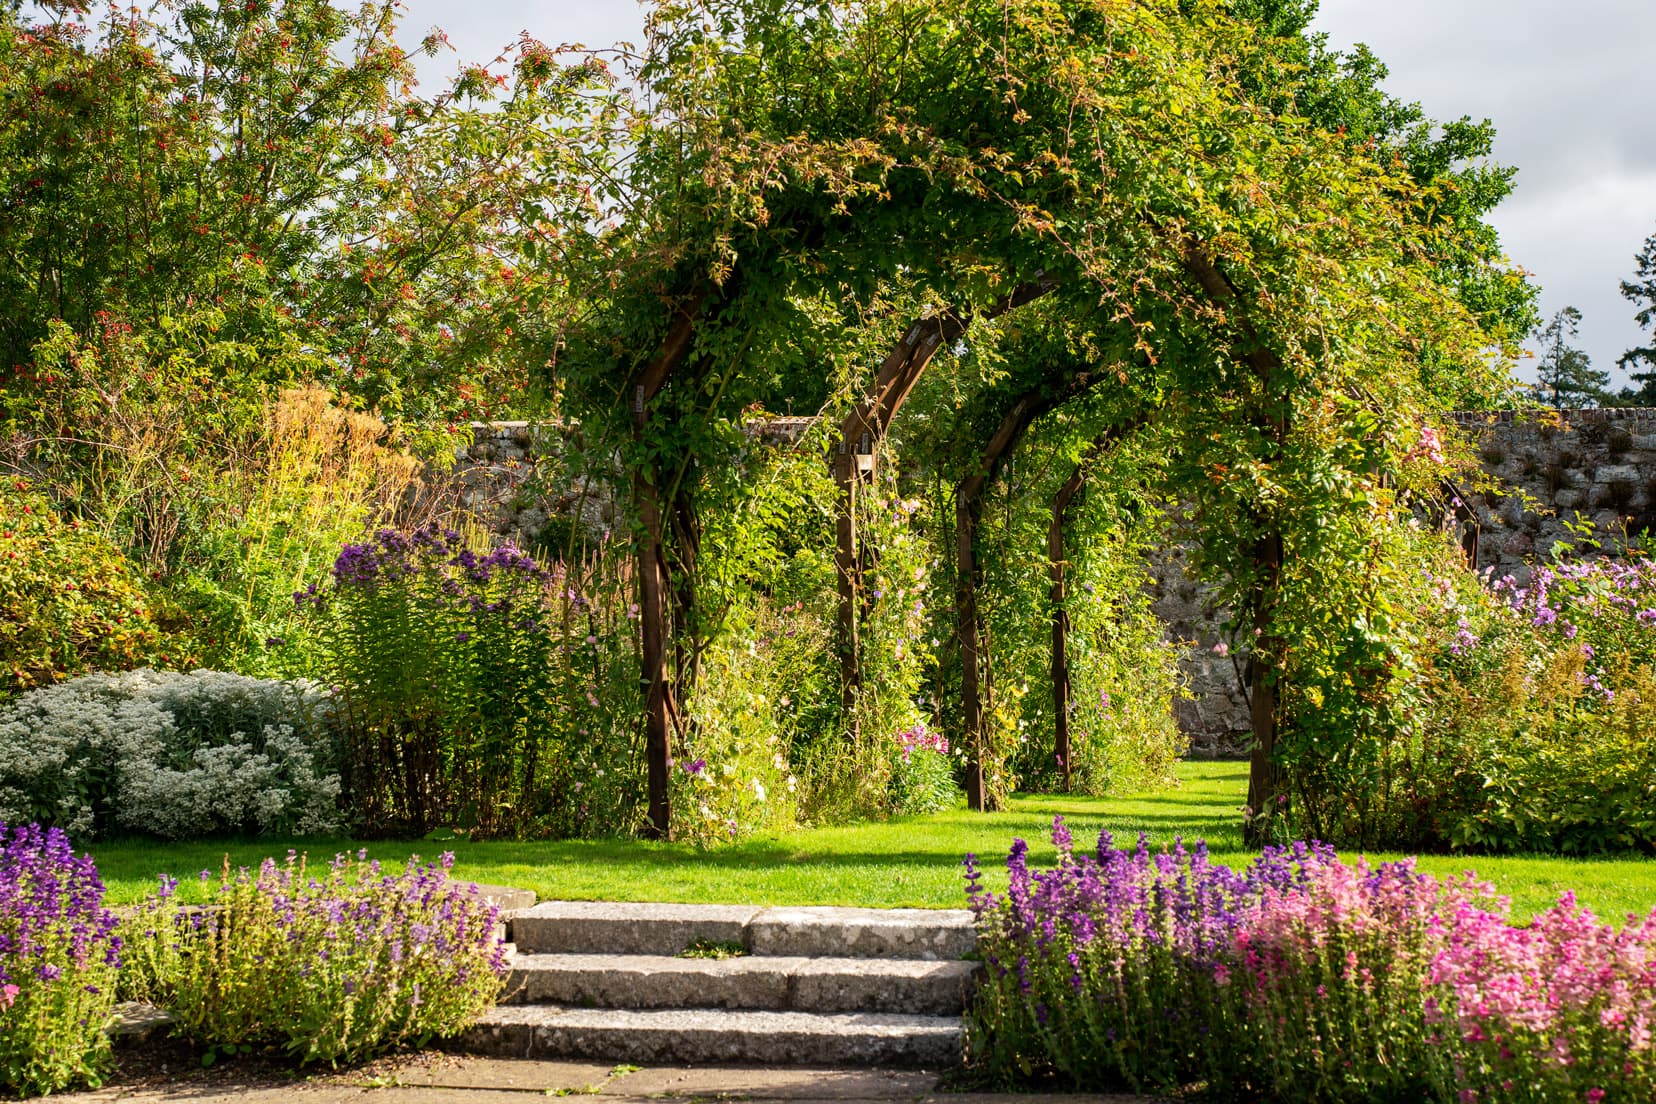 Castle-Drum walled rose garden with a flowering archway